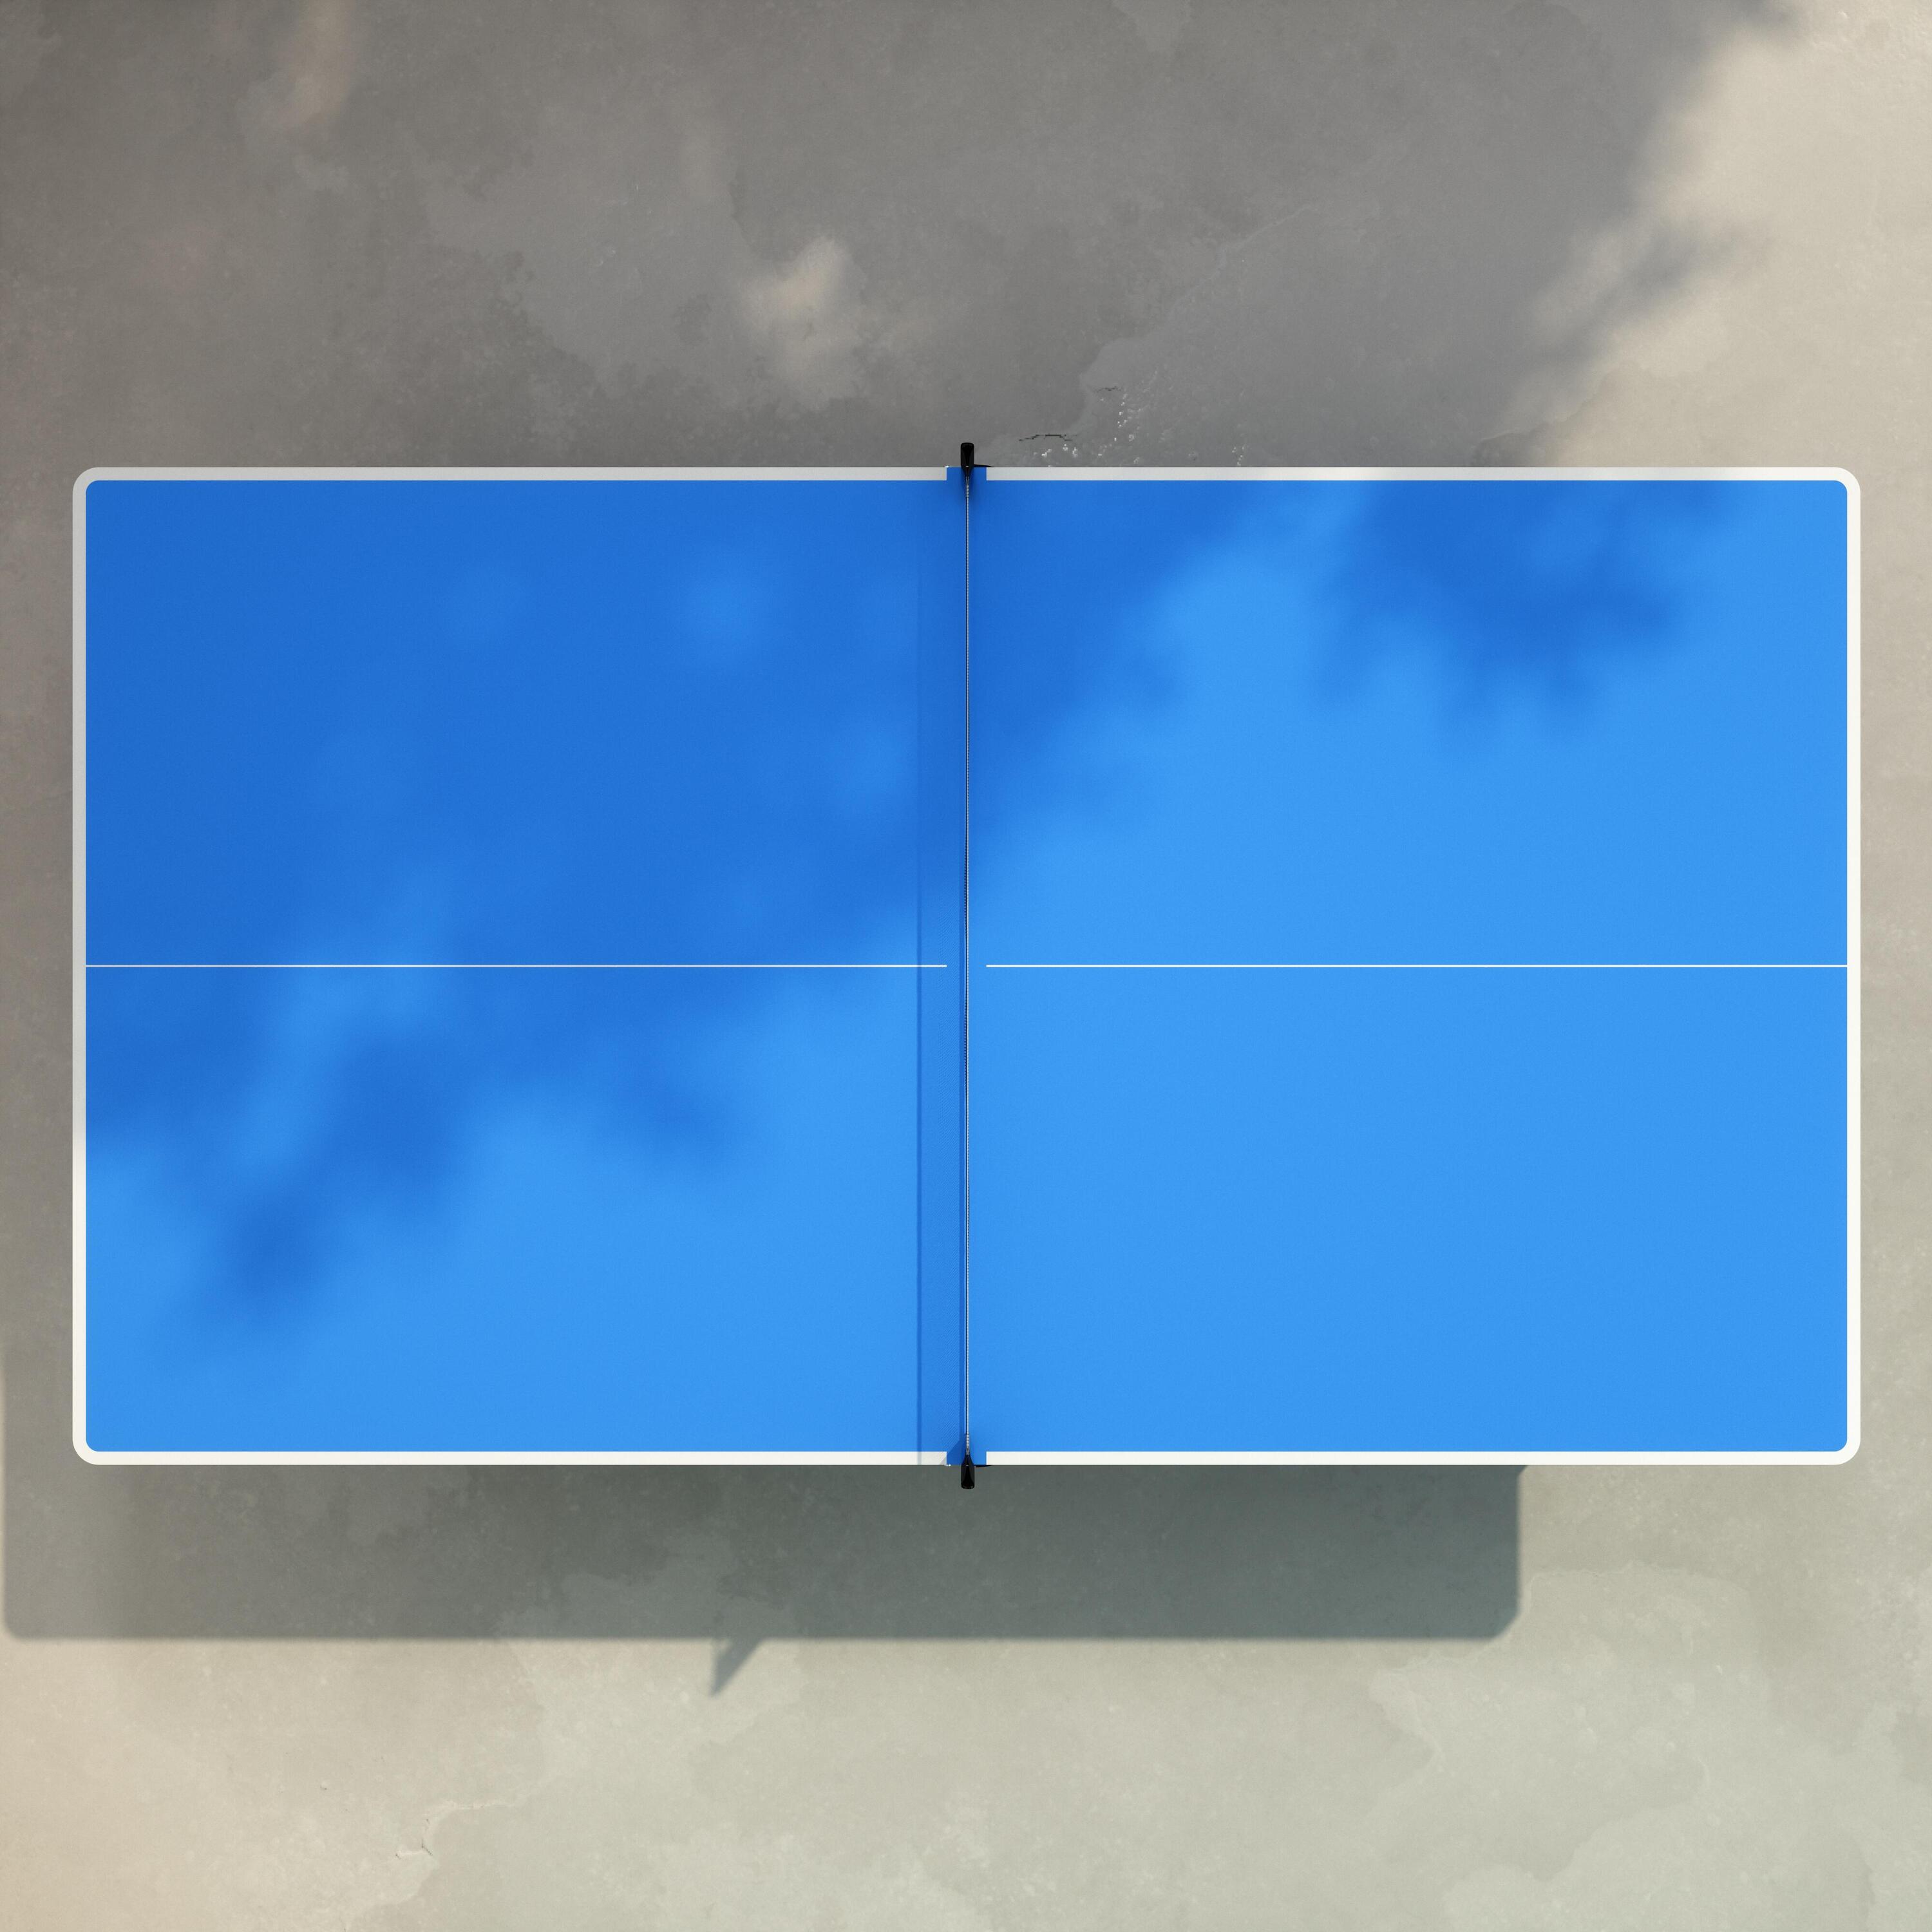 Outdoor Table Tennis Table PPT 130 - Blue 8/11